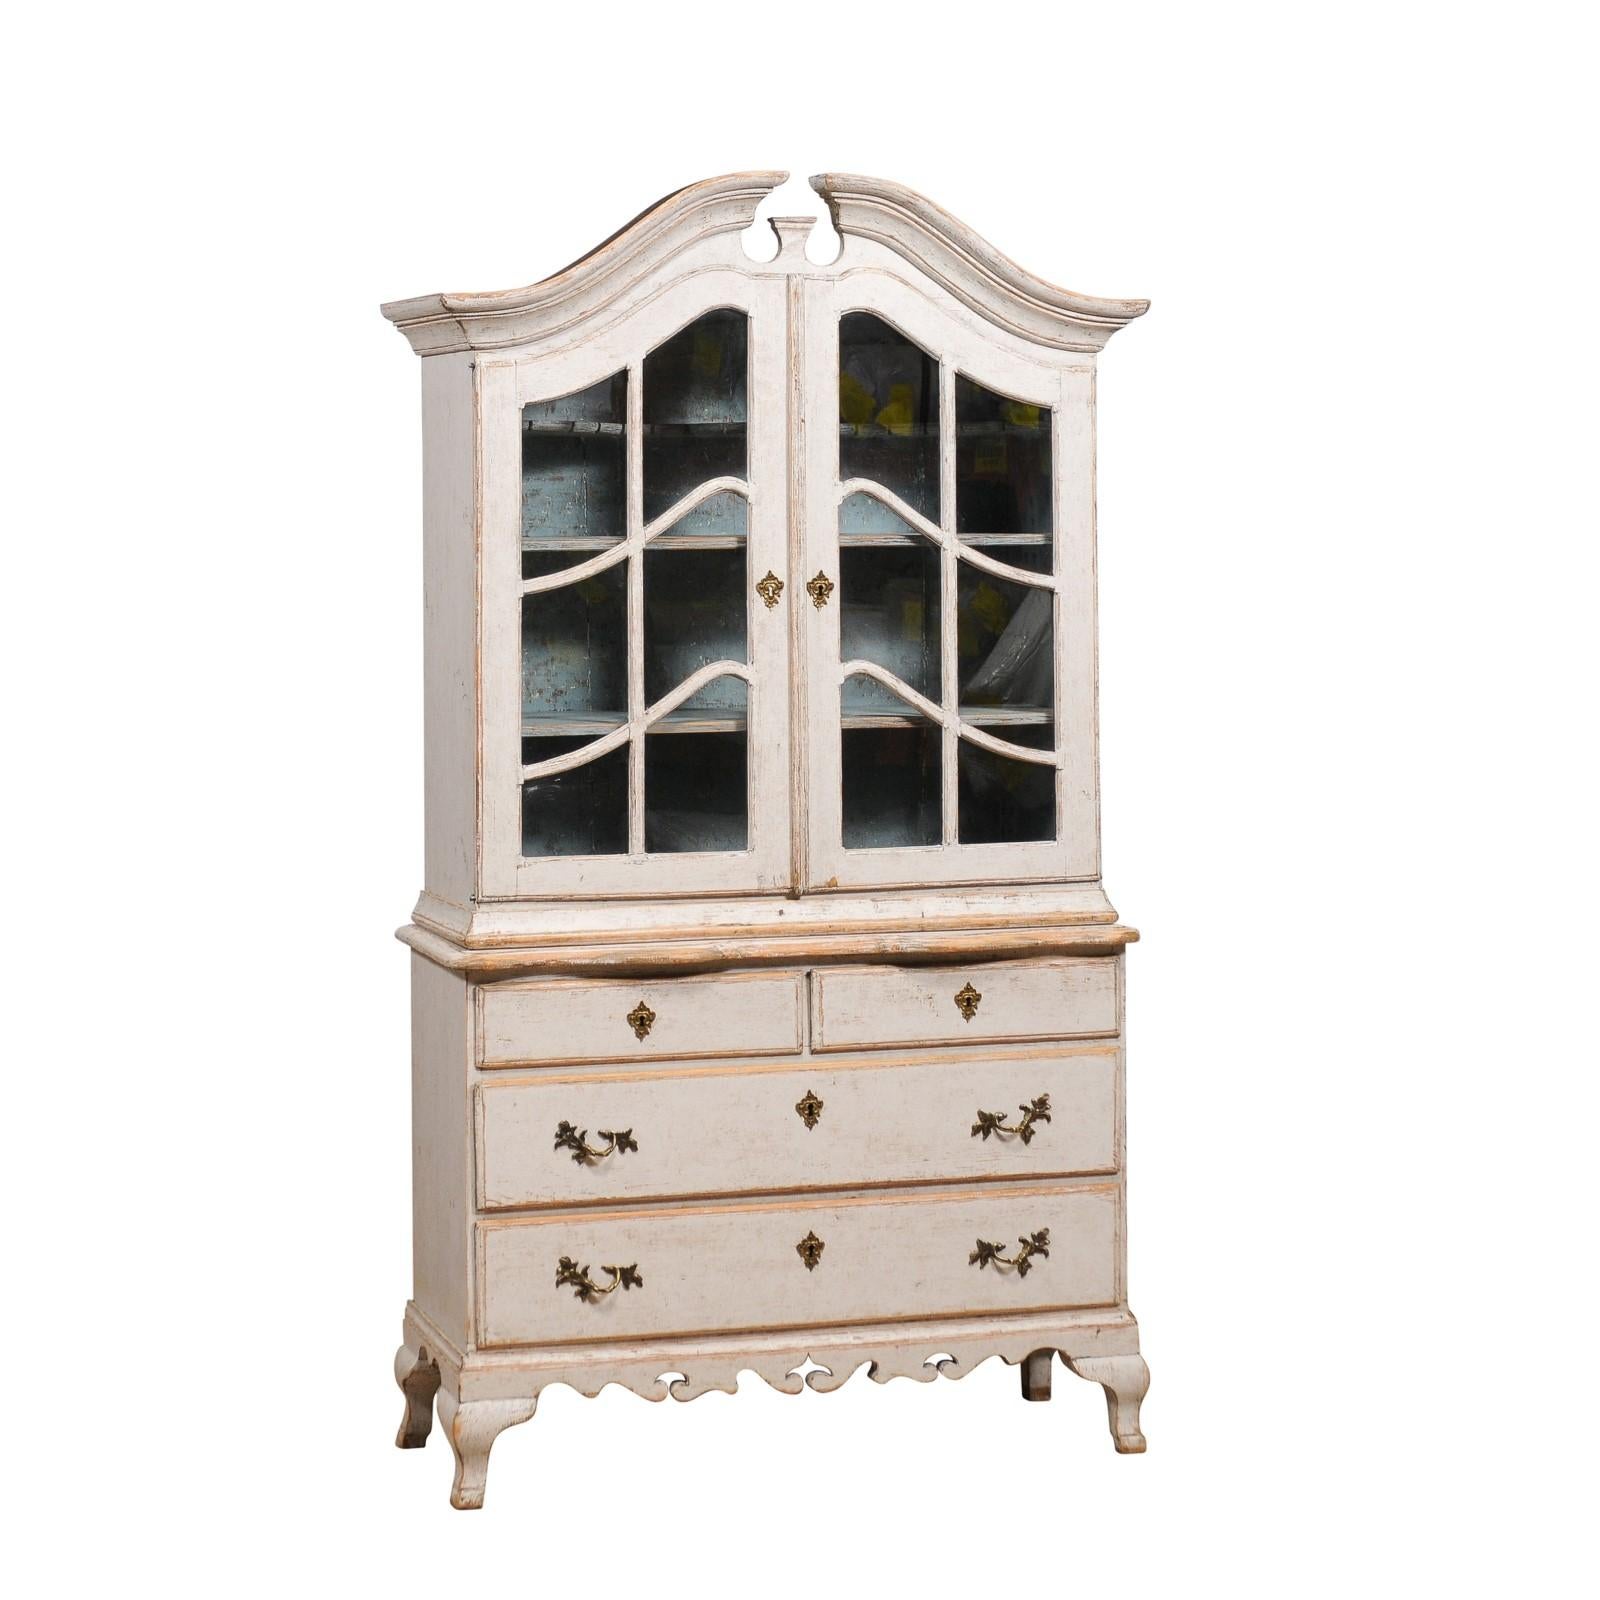 A Swedish Rococo style rich light grey painted vitrine cabinet from circa 1850 with bonnet top pediment, glass doors, four drawers, carved apron and curving feet. Emanate elegance with this Swedish Rococo-style vitrine cabinet from circa 1850, a